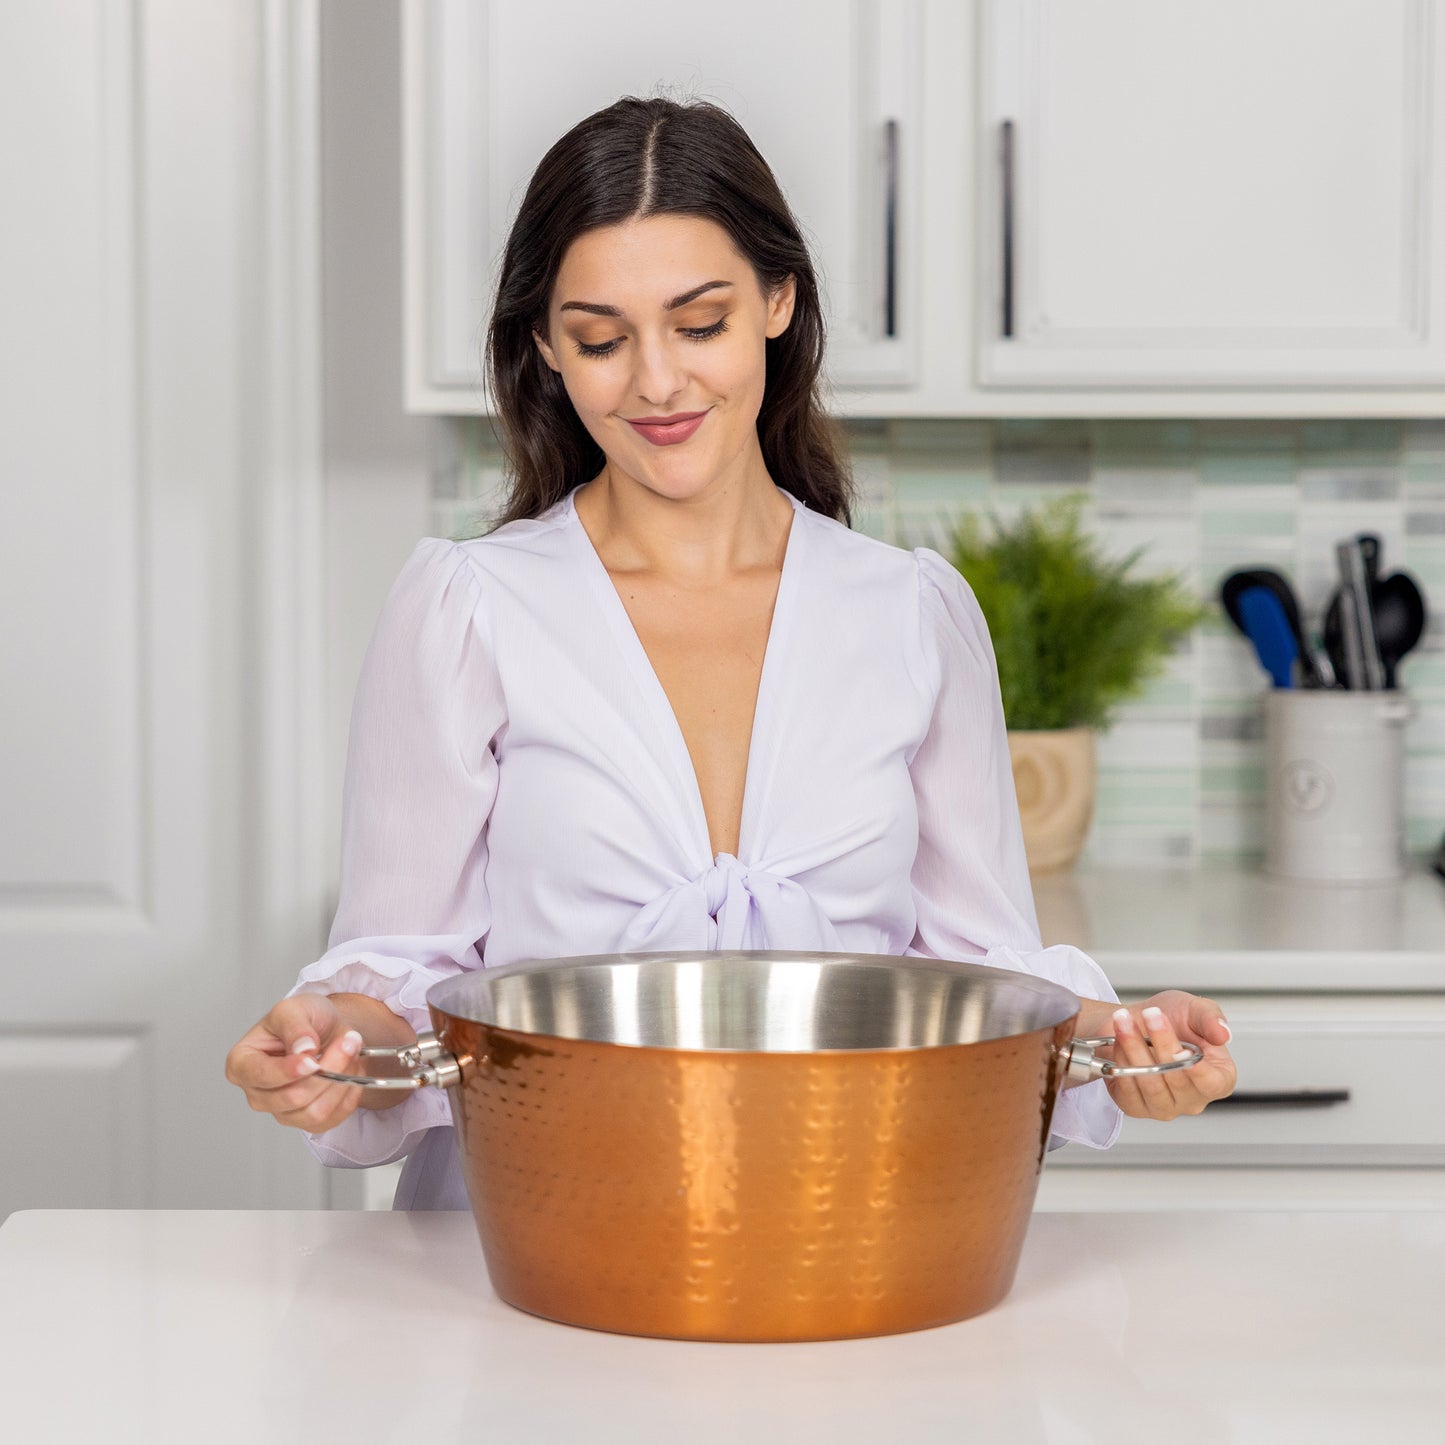 Insulated copper party tub to chill drinks, wine, beer, or champagne for parties.  Use in the kitchen, dining room, bar or on the patio.  Celebrate weddings, anniversary, birthday, or holiday party.  Double wall with durable hammered exterior.